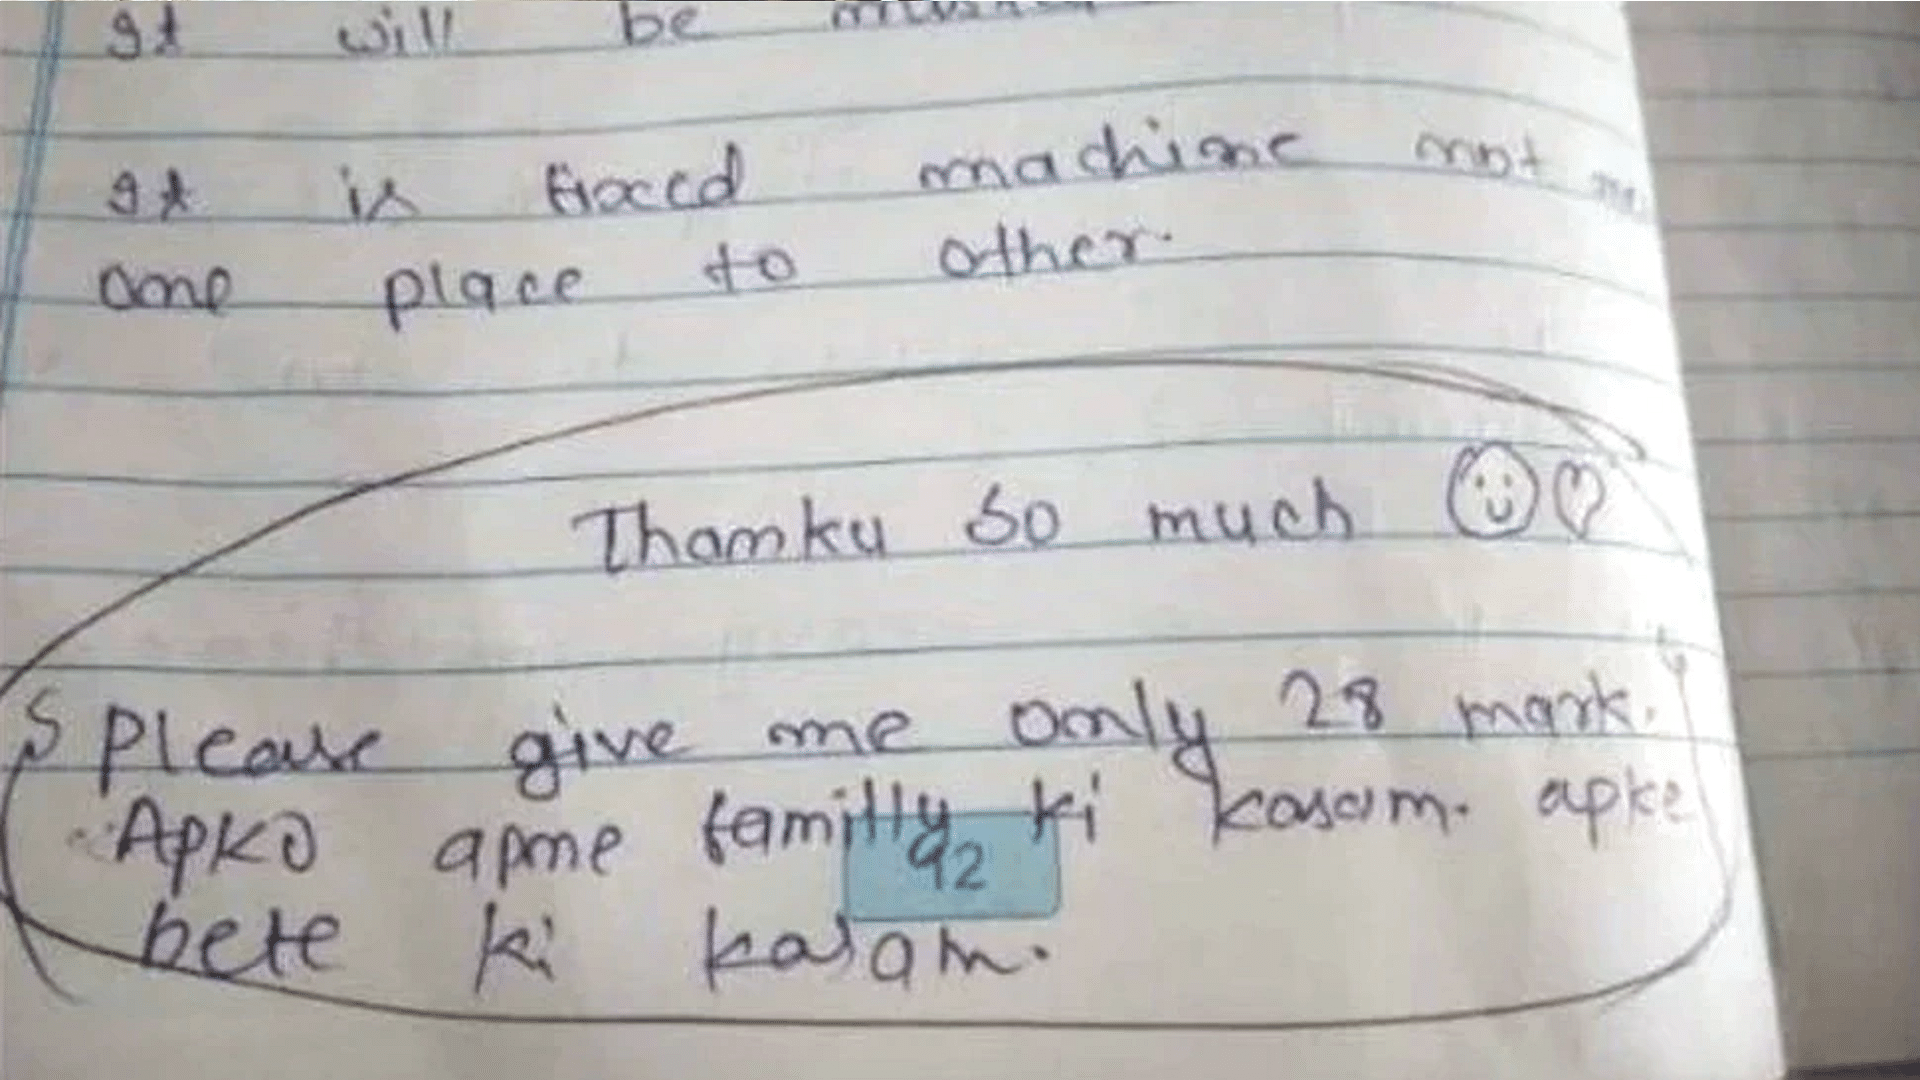 The student wrote such a message to the teacher answer sheet went viral on social media